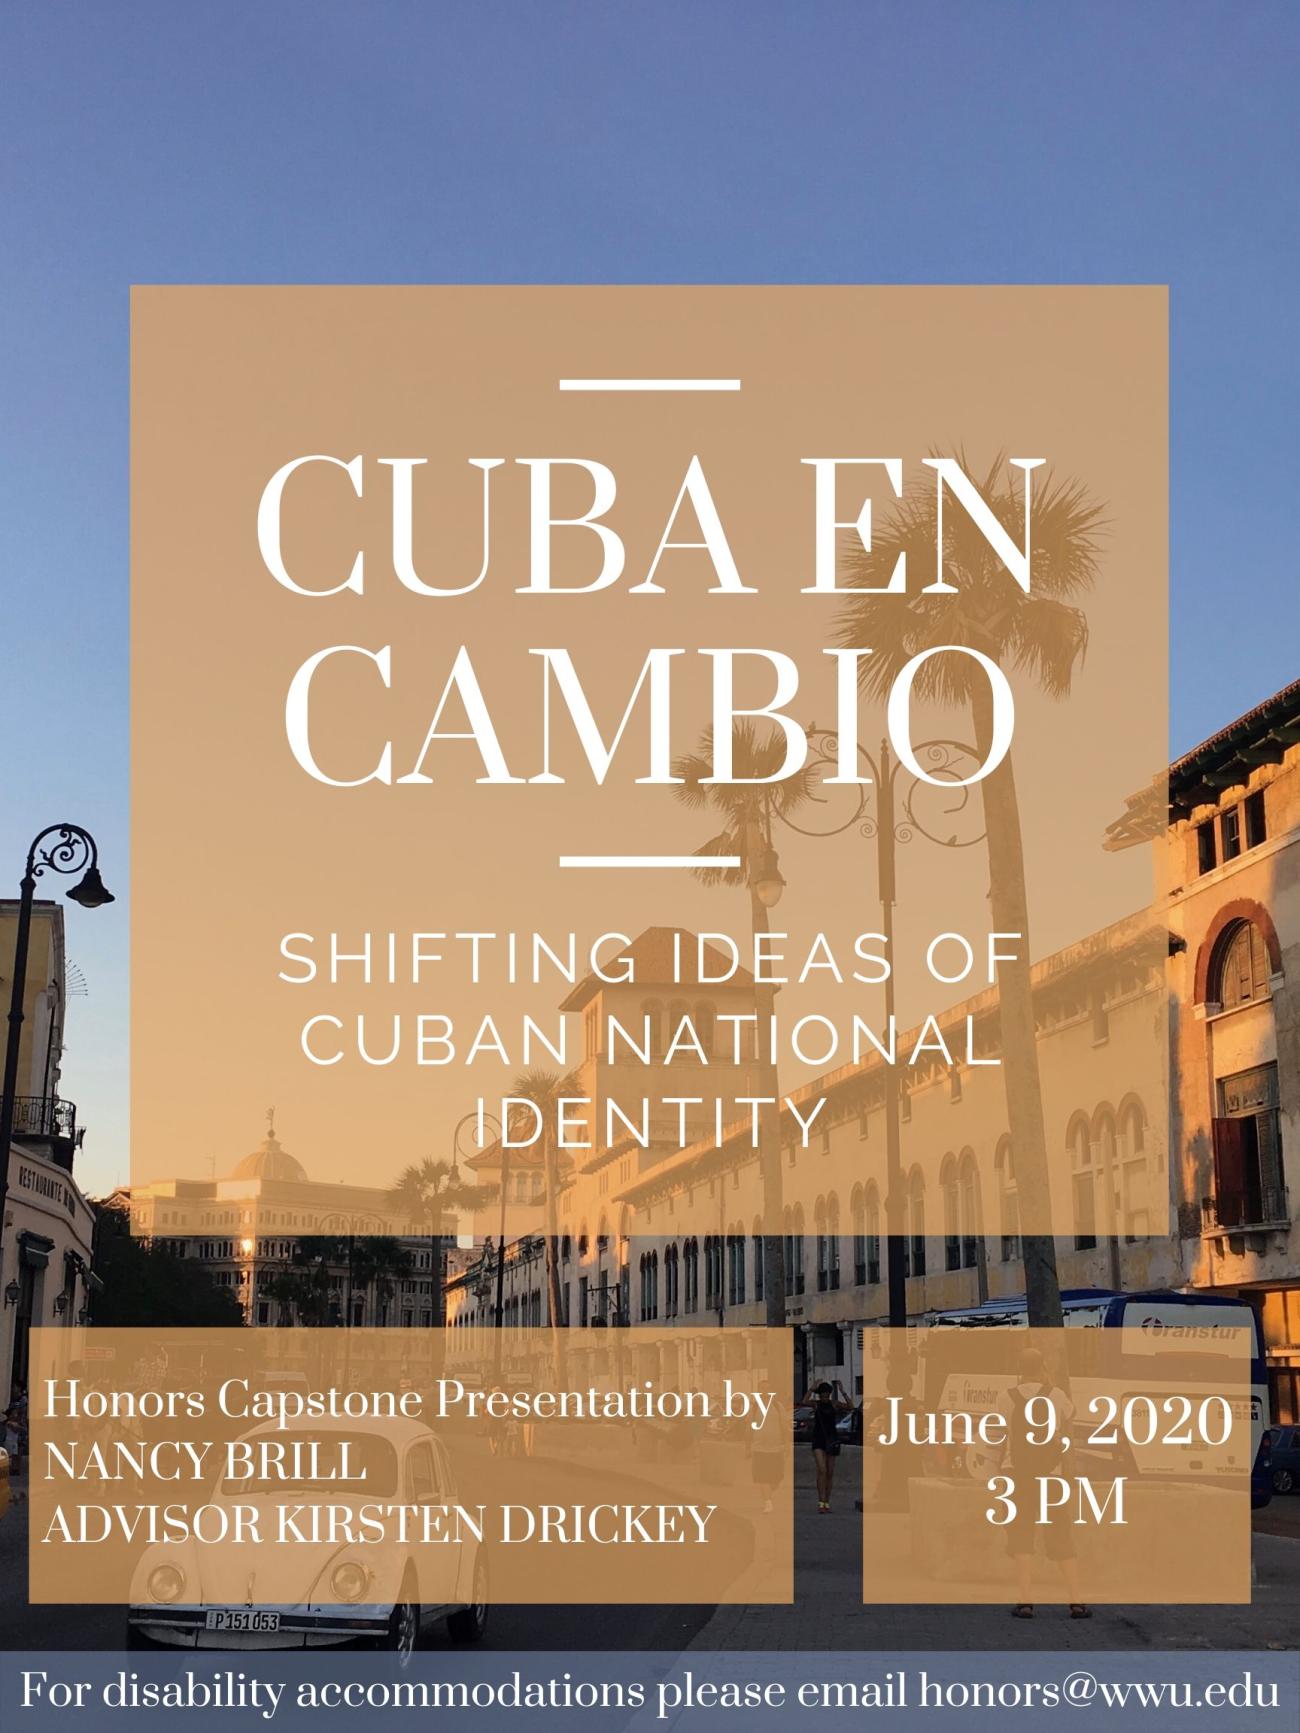 Image: Havana street in sunlight. Text: "Cuba en cambio, Shifting Ideas of Cuban National Identity. Honors capstone presentation by Nancy Brill, advised by Kirsten Drickey. June 9th, 2020. For disability accommodations please email honors@wwu.edu."